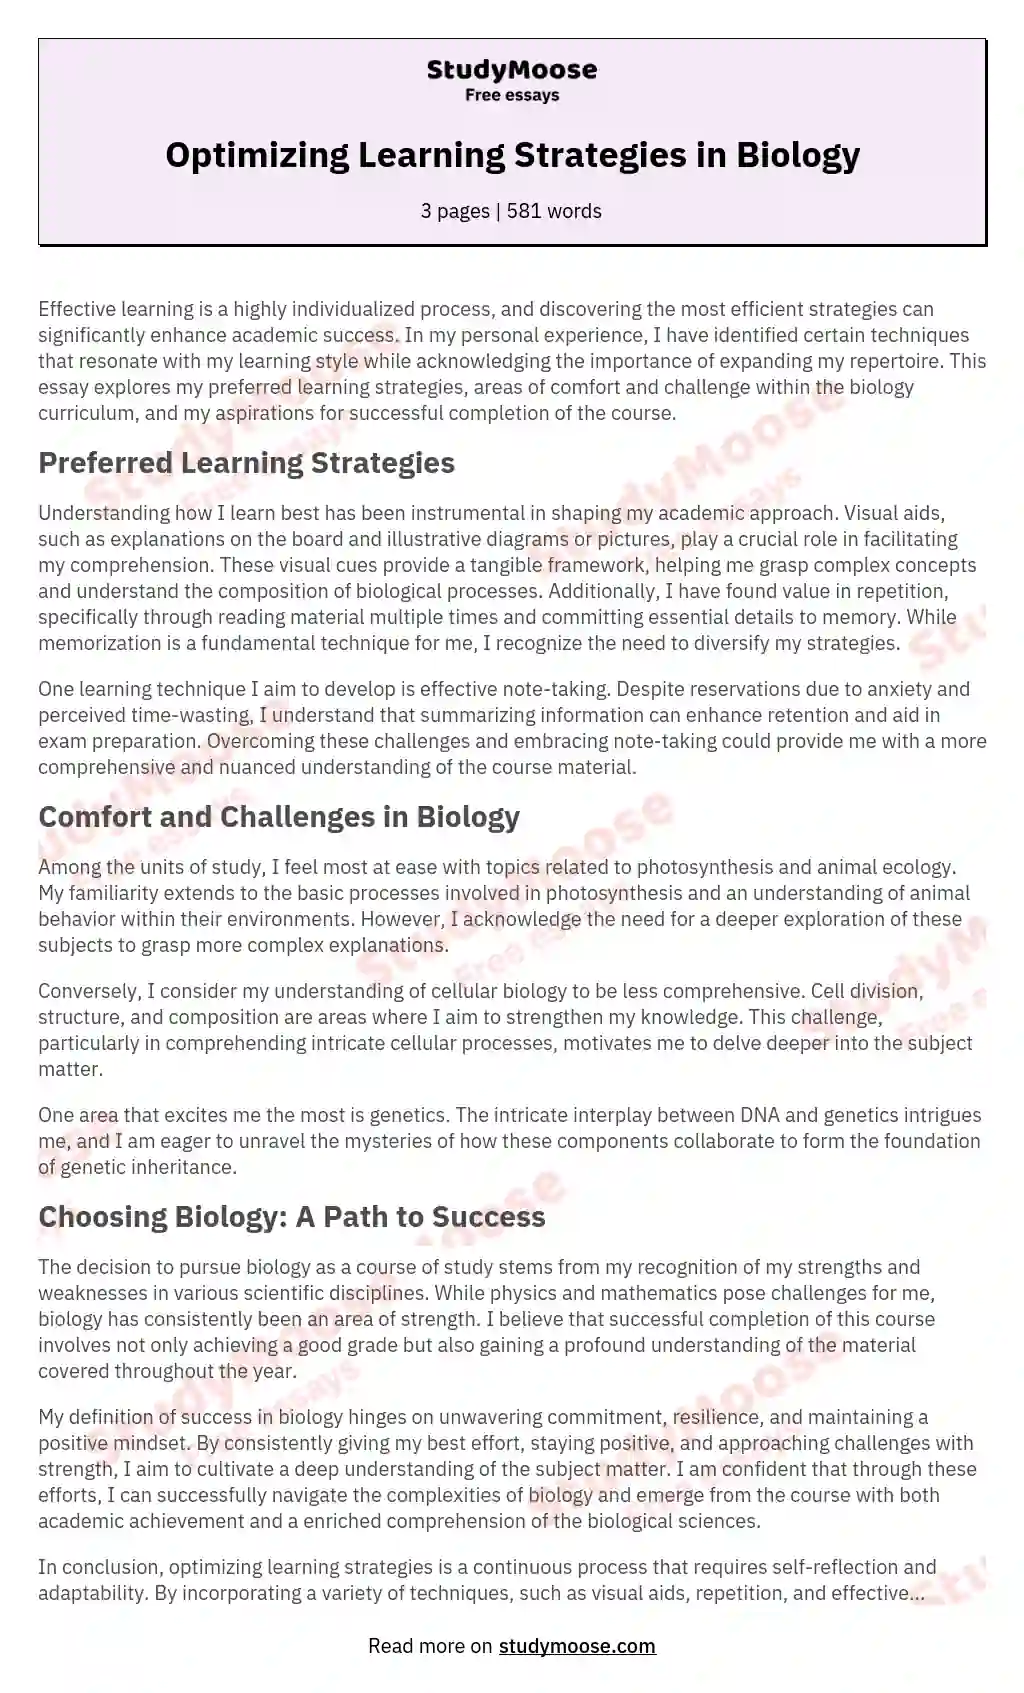 Optimizing Learning Strategies in Biology essay